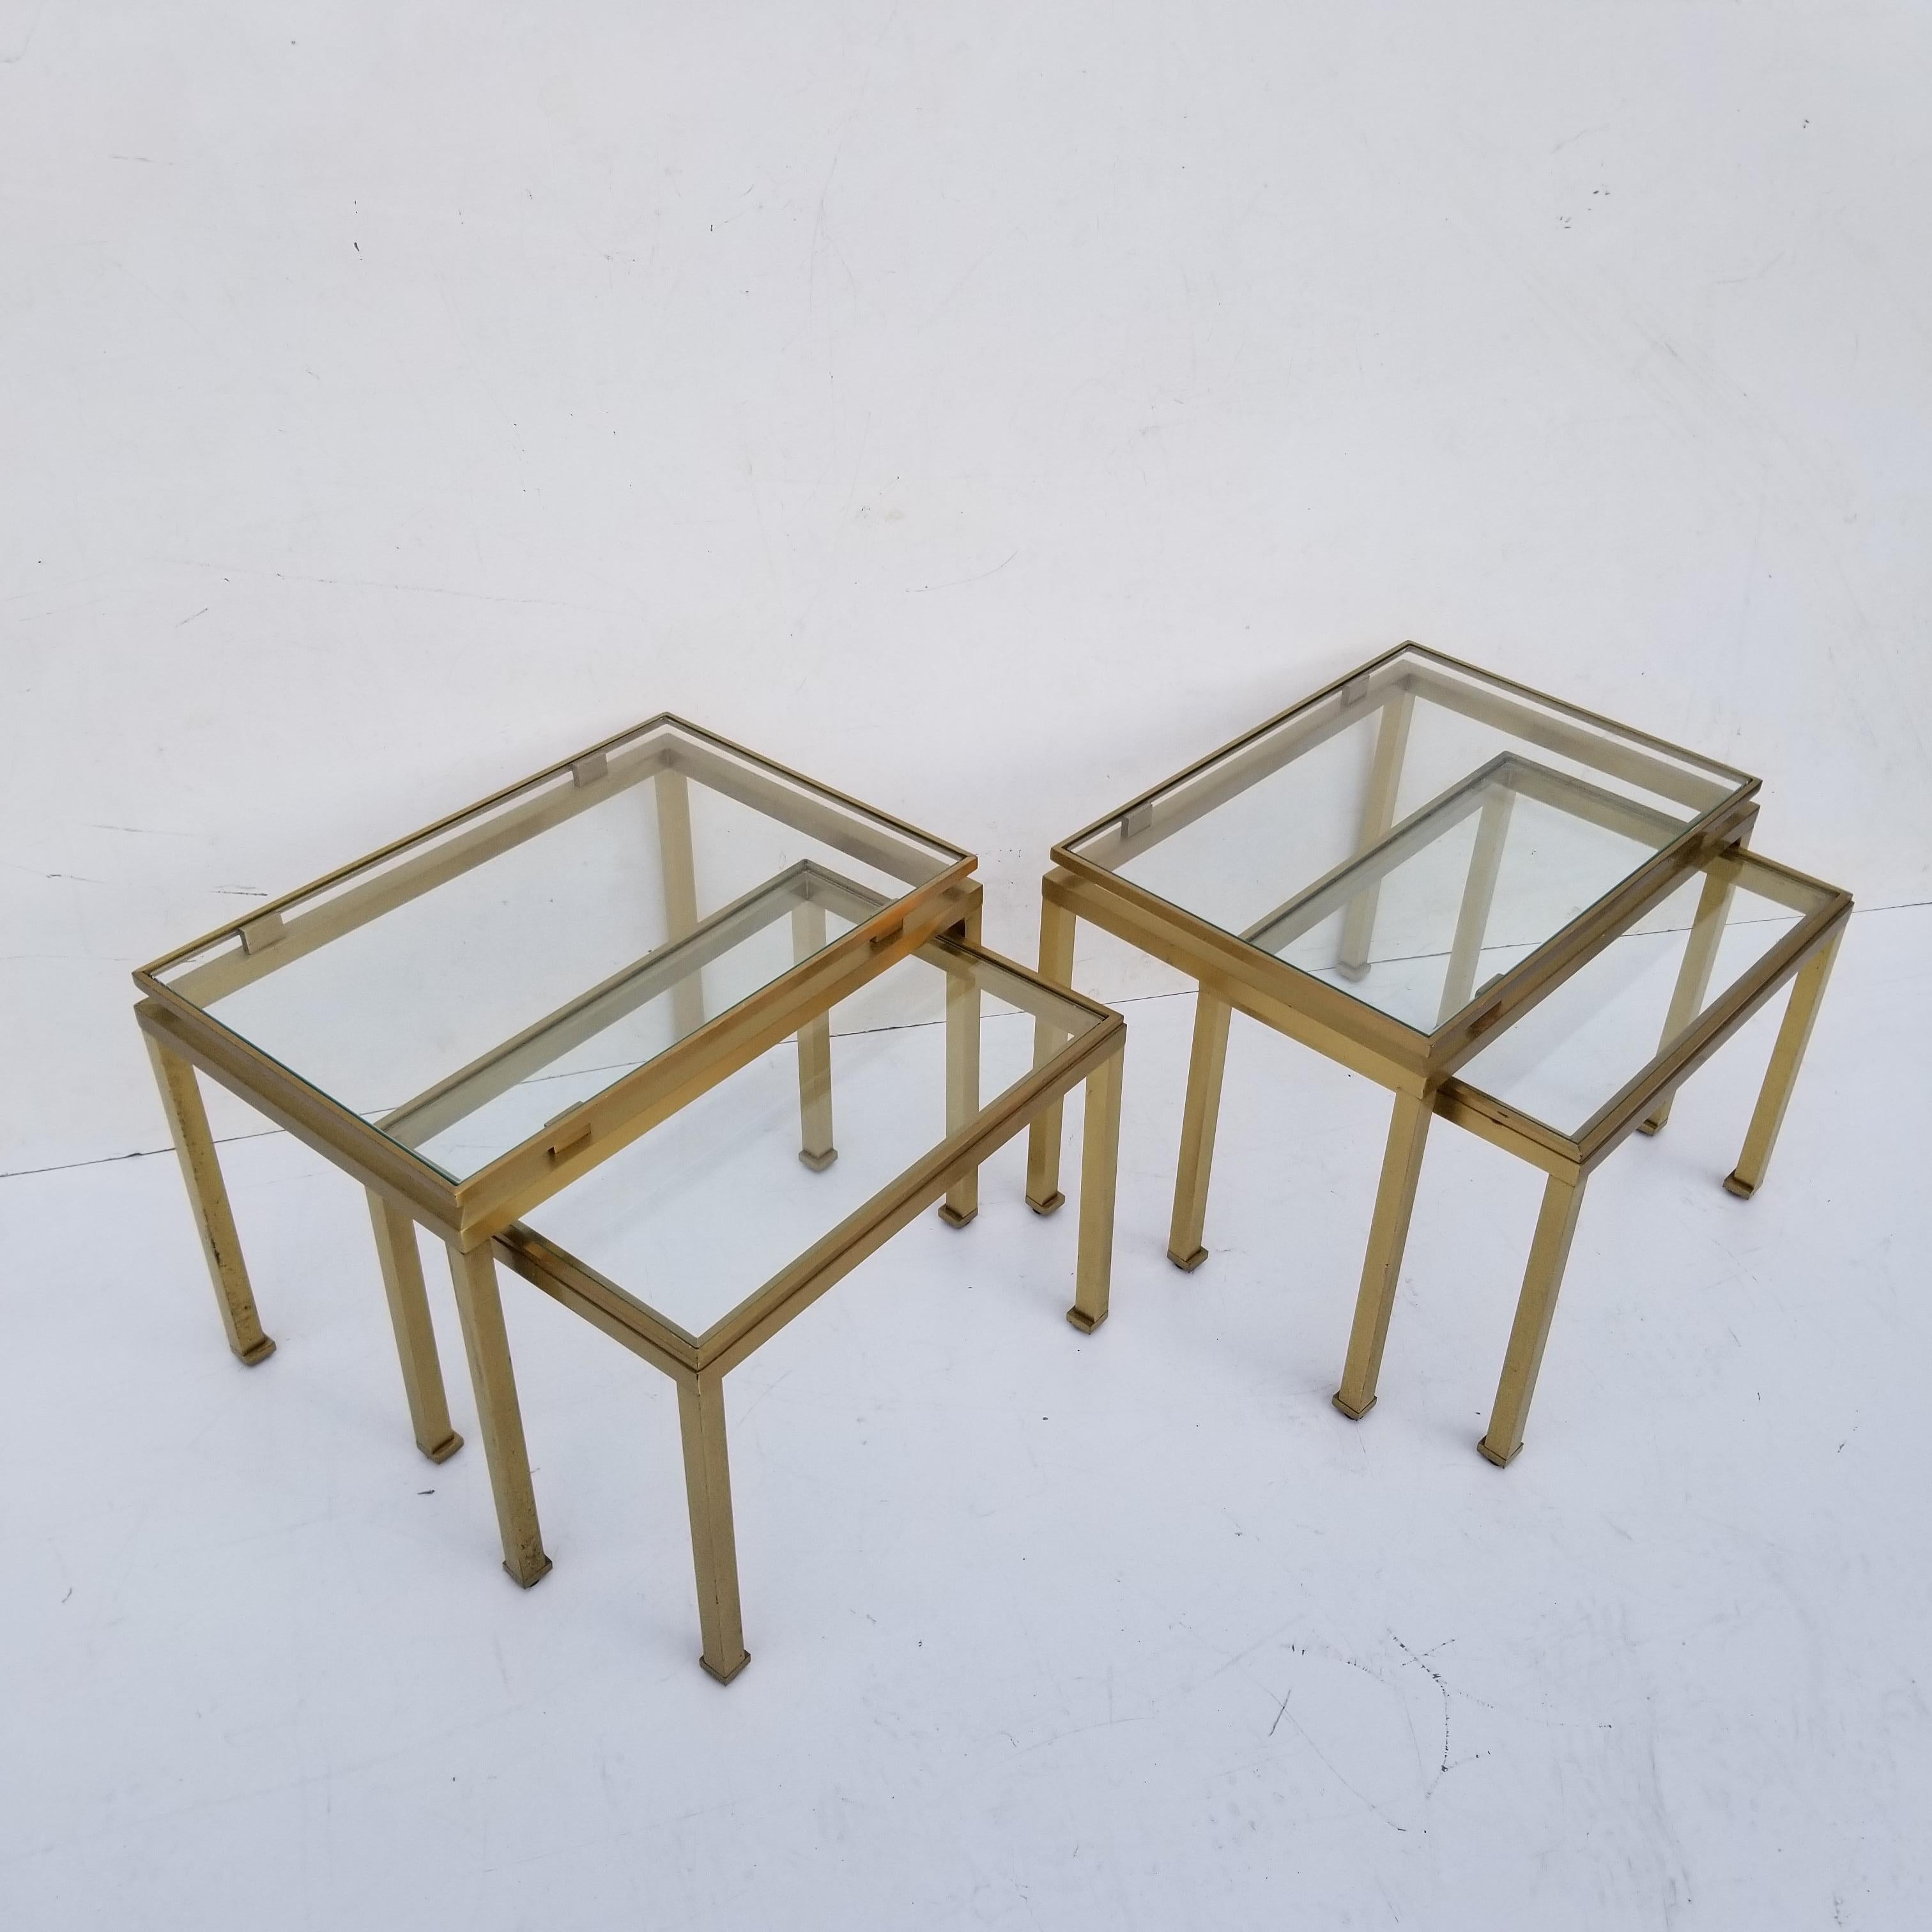 Pair of Guy Lefevre for Maison Jansen side table, nesting table, floating glass top.
Low table 17 /13/13
Top table 20/14/15.